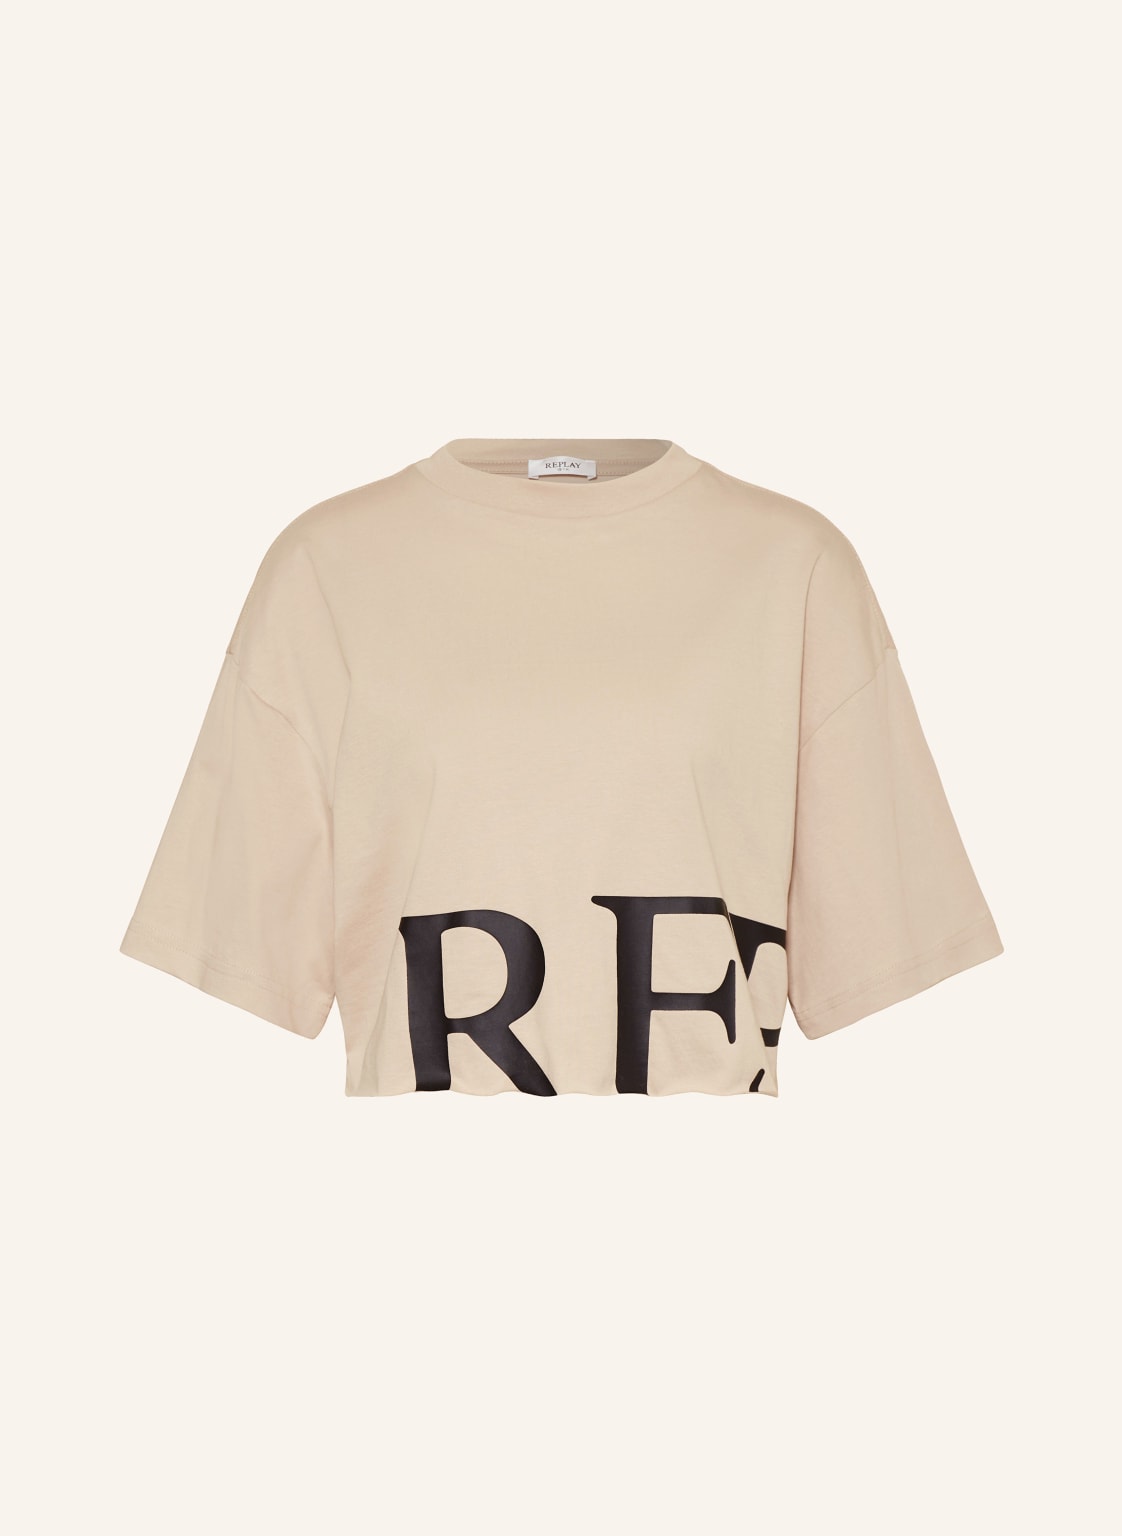 Replay Cropped-Shirt beige von Replay